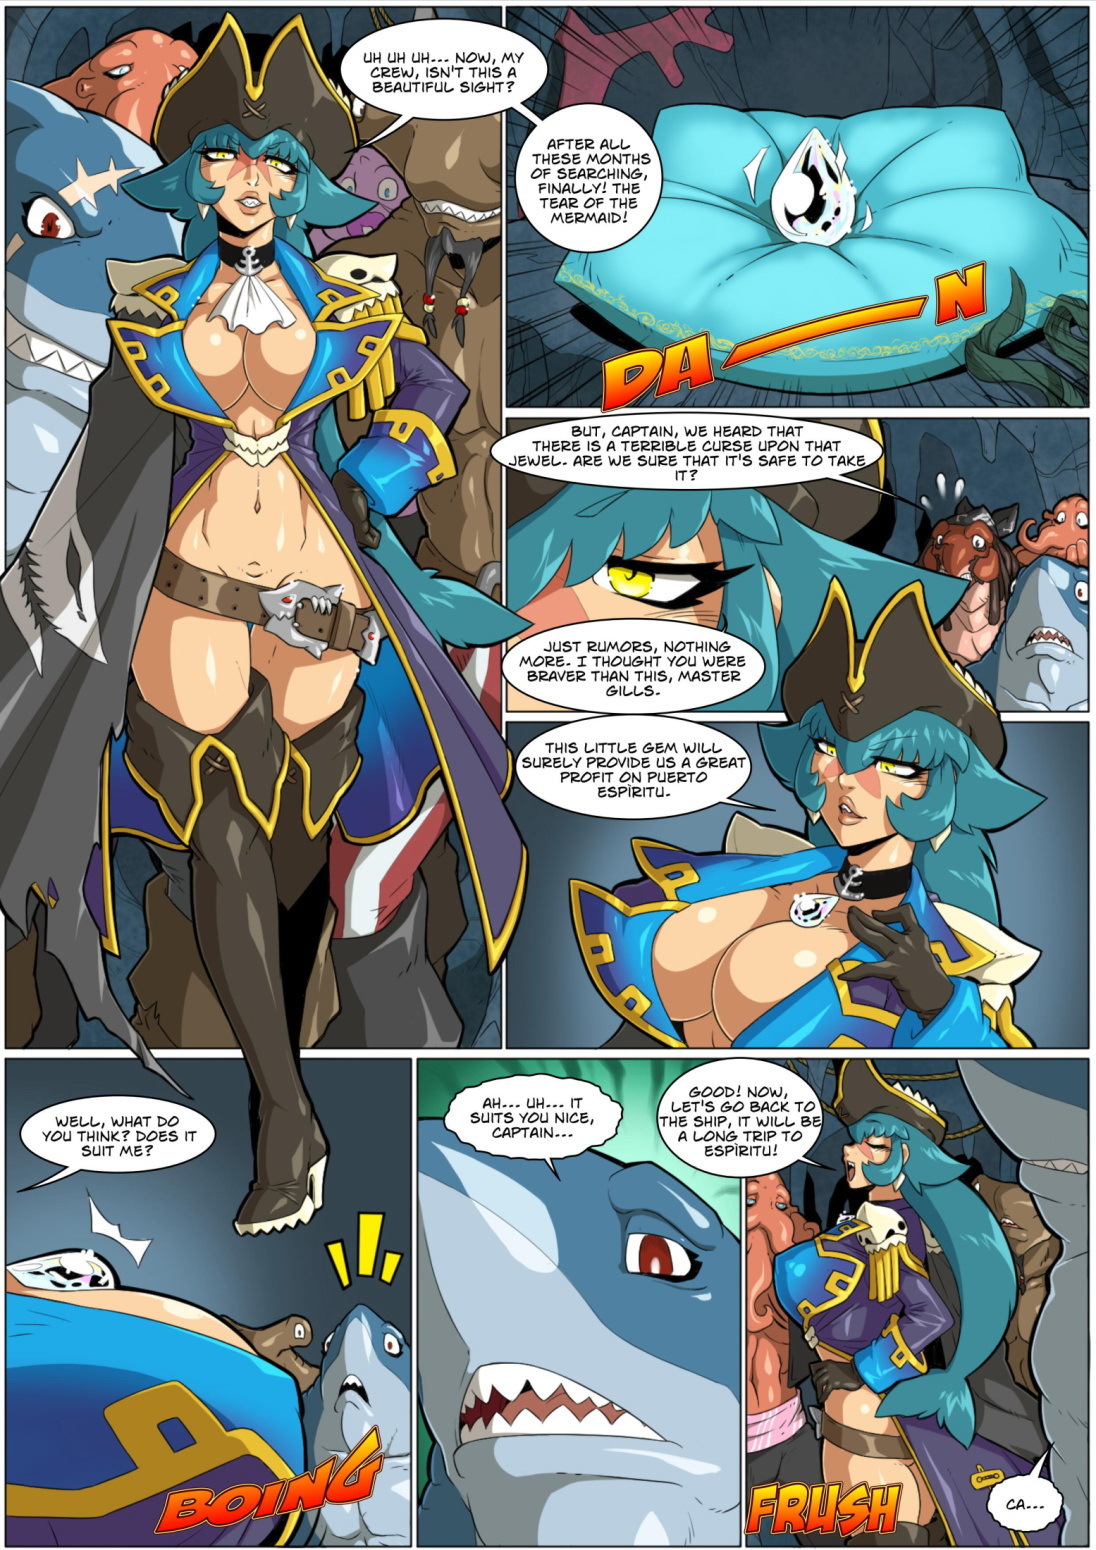 Captain Barracuda and the Tear of the Mermaid - Page 2